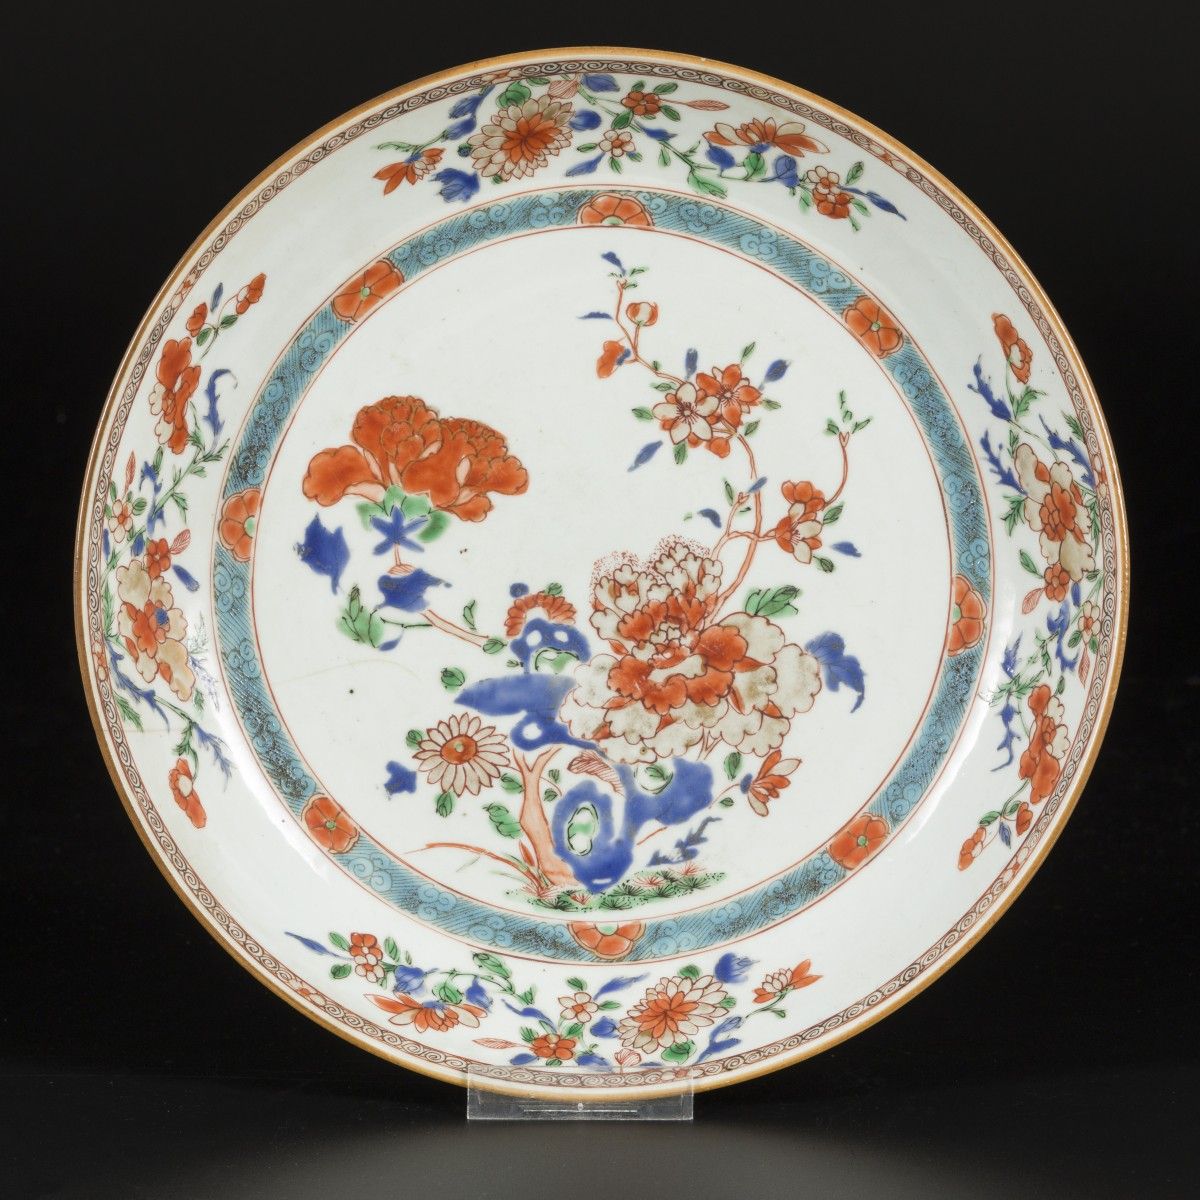 A porcelain charger with floral decorations, China, 18th century. Diam. 28 cm. L&hellip;